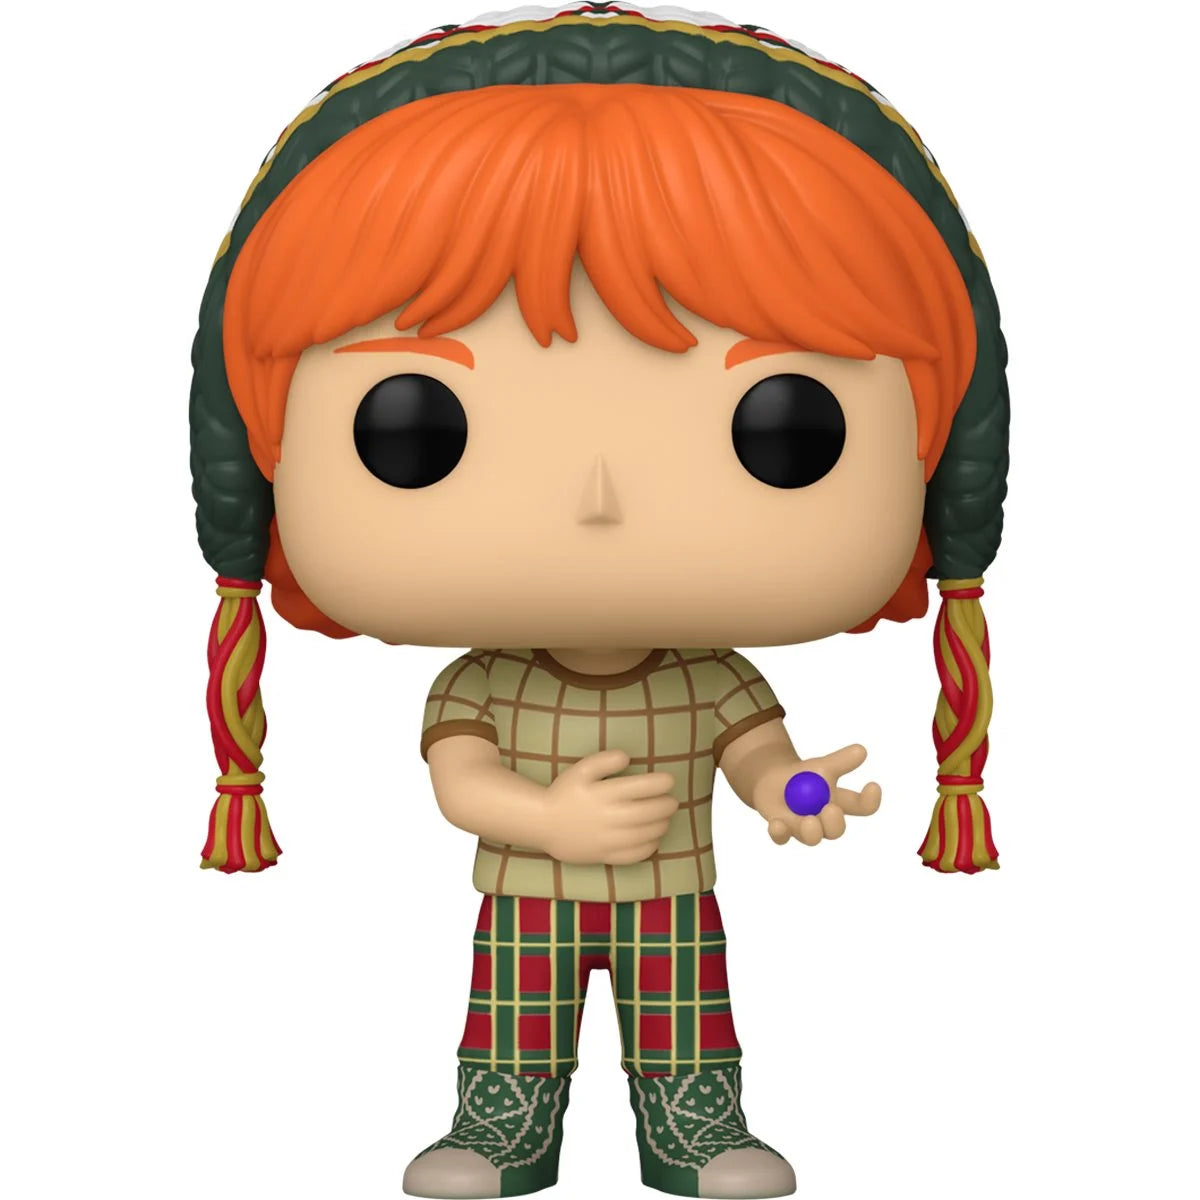 Harry Potter and the Prisoner of Azkaban Ron Weasley with Candy Funko Pop! Vinyl Figure #166 Funko